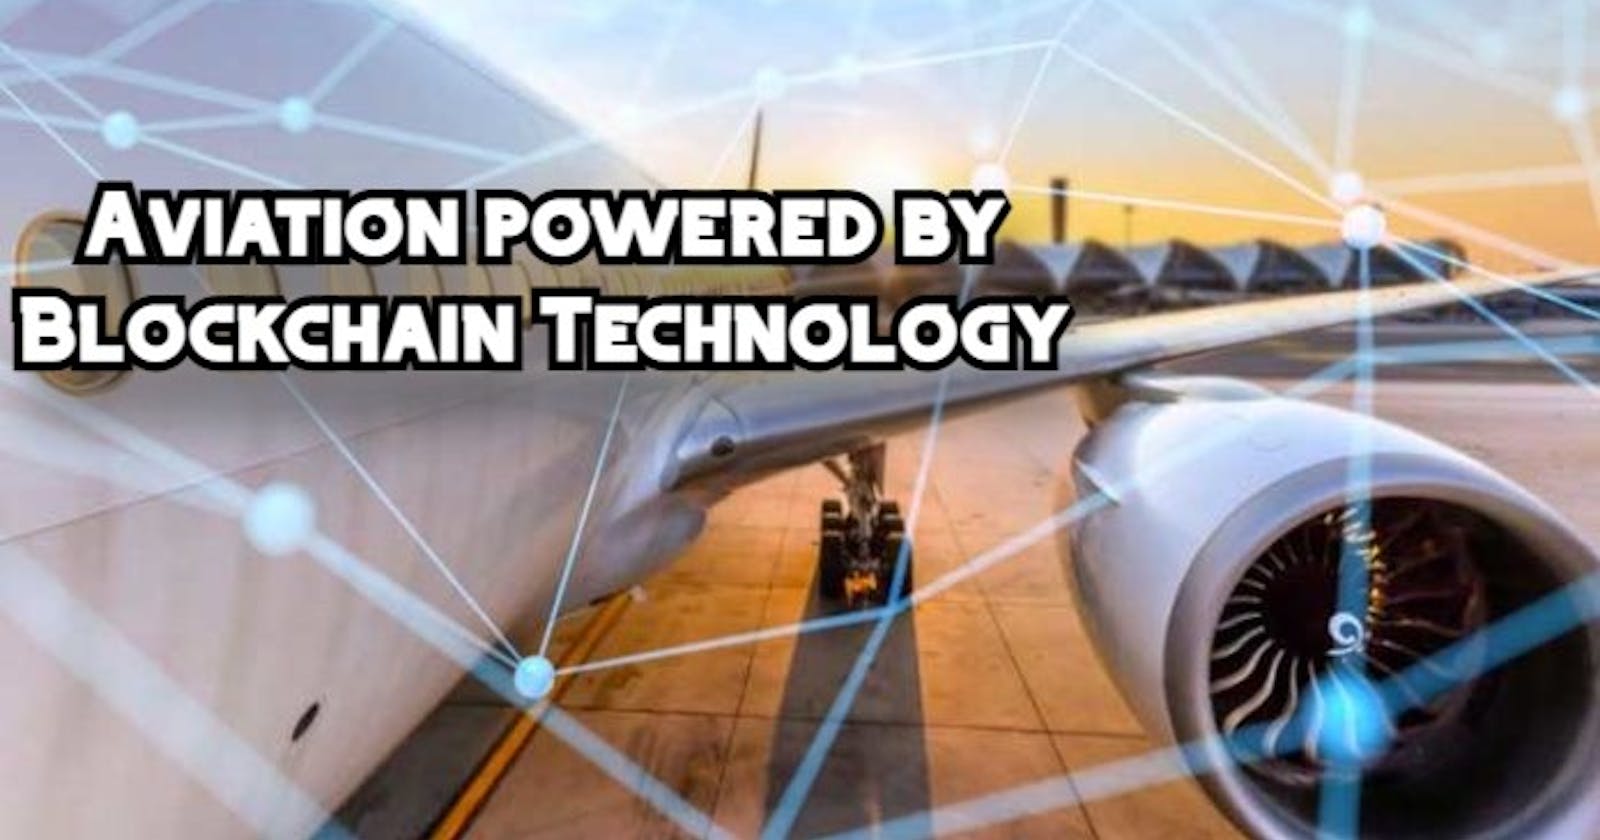 Implementing Blockchain in the aviation industry